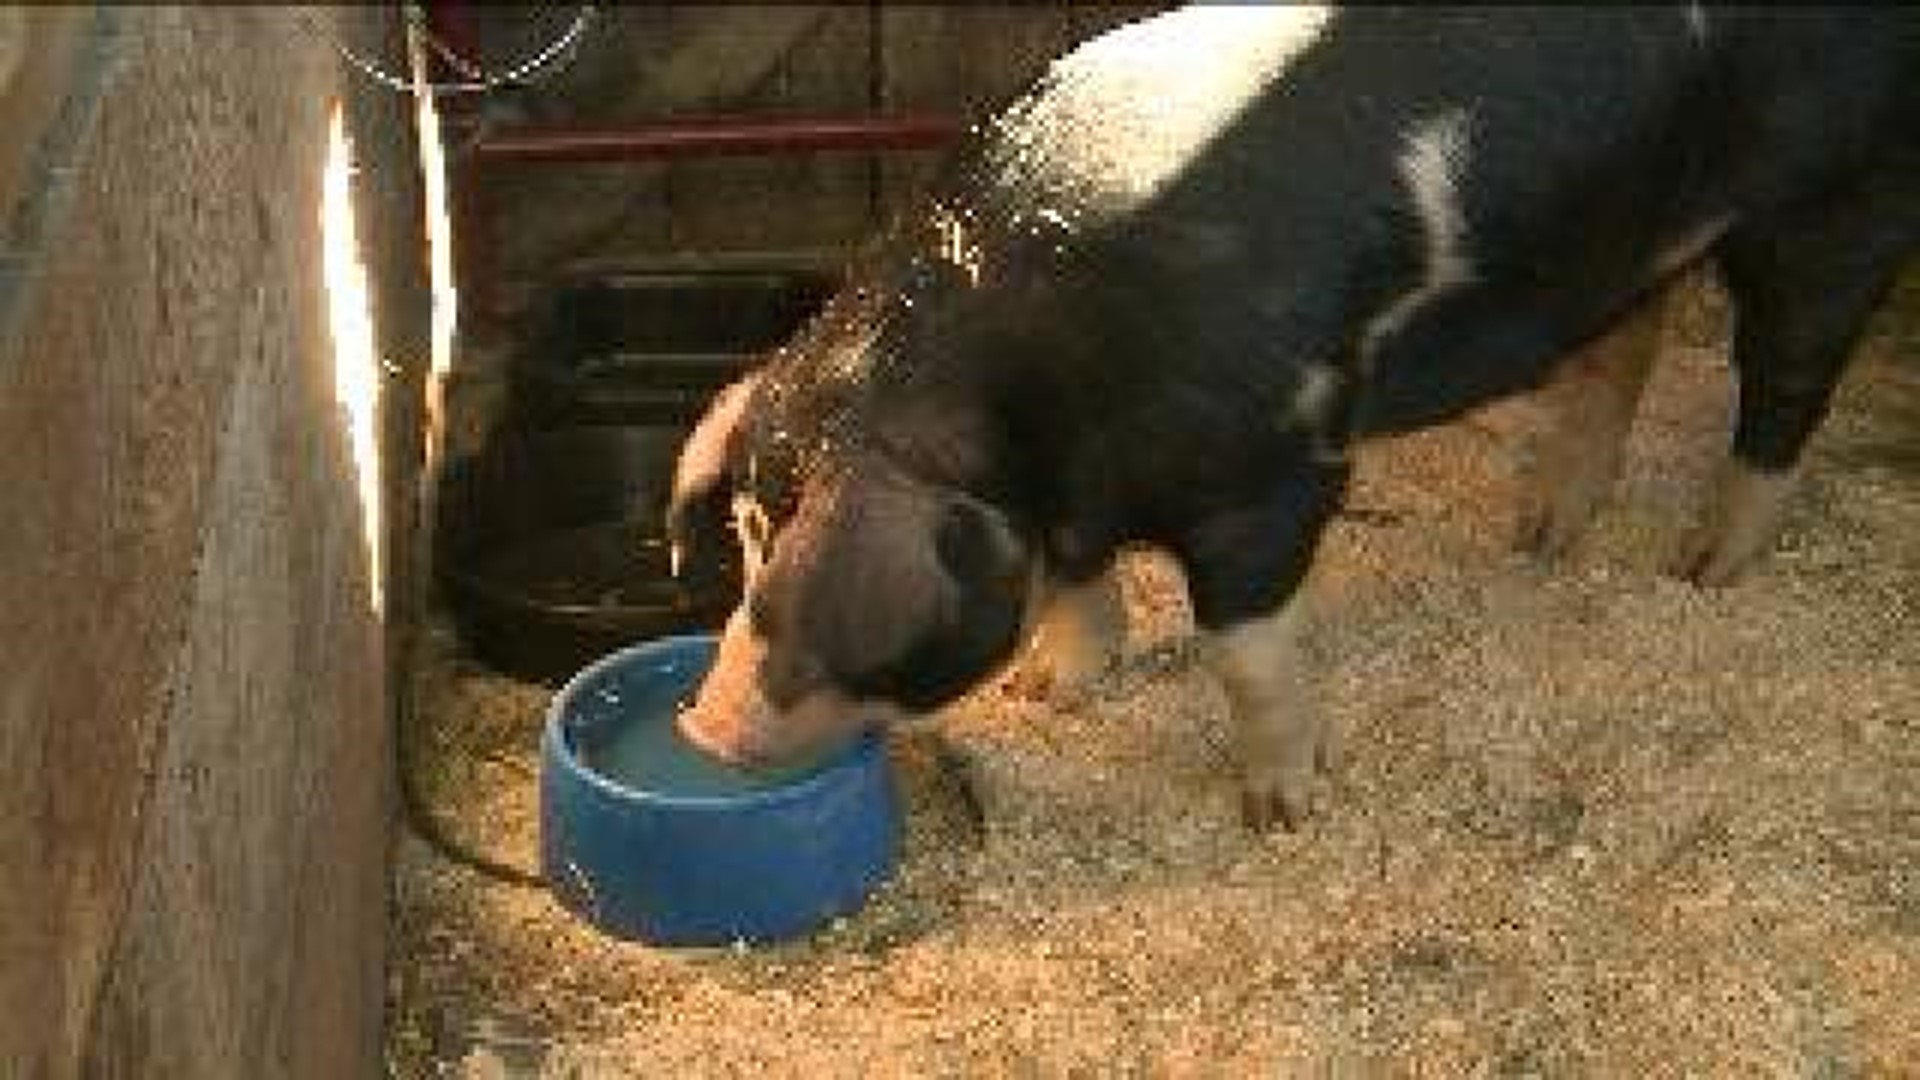 ‘Some Pig’ Saved From Slaughter In Mehoopany